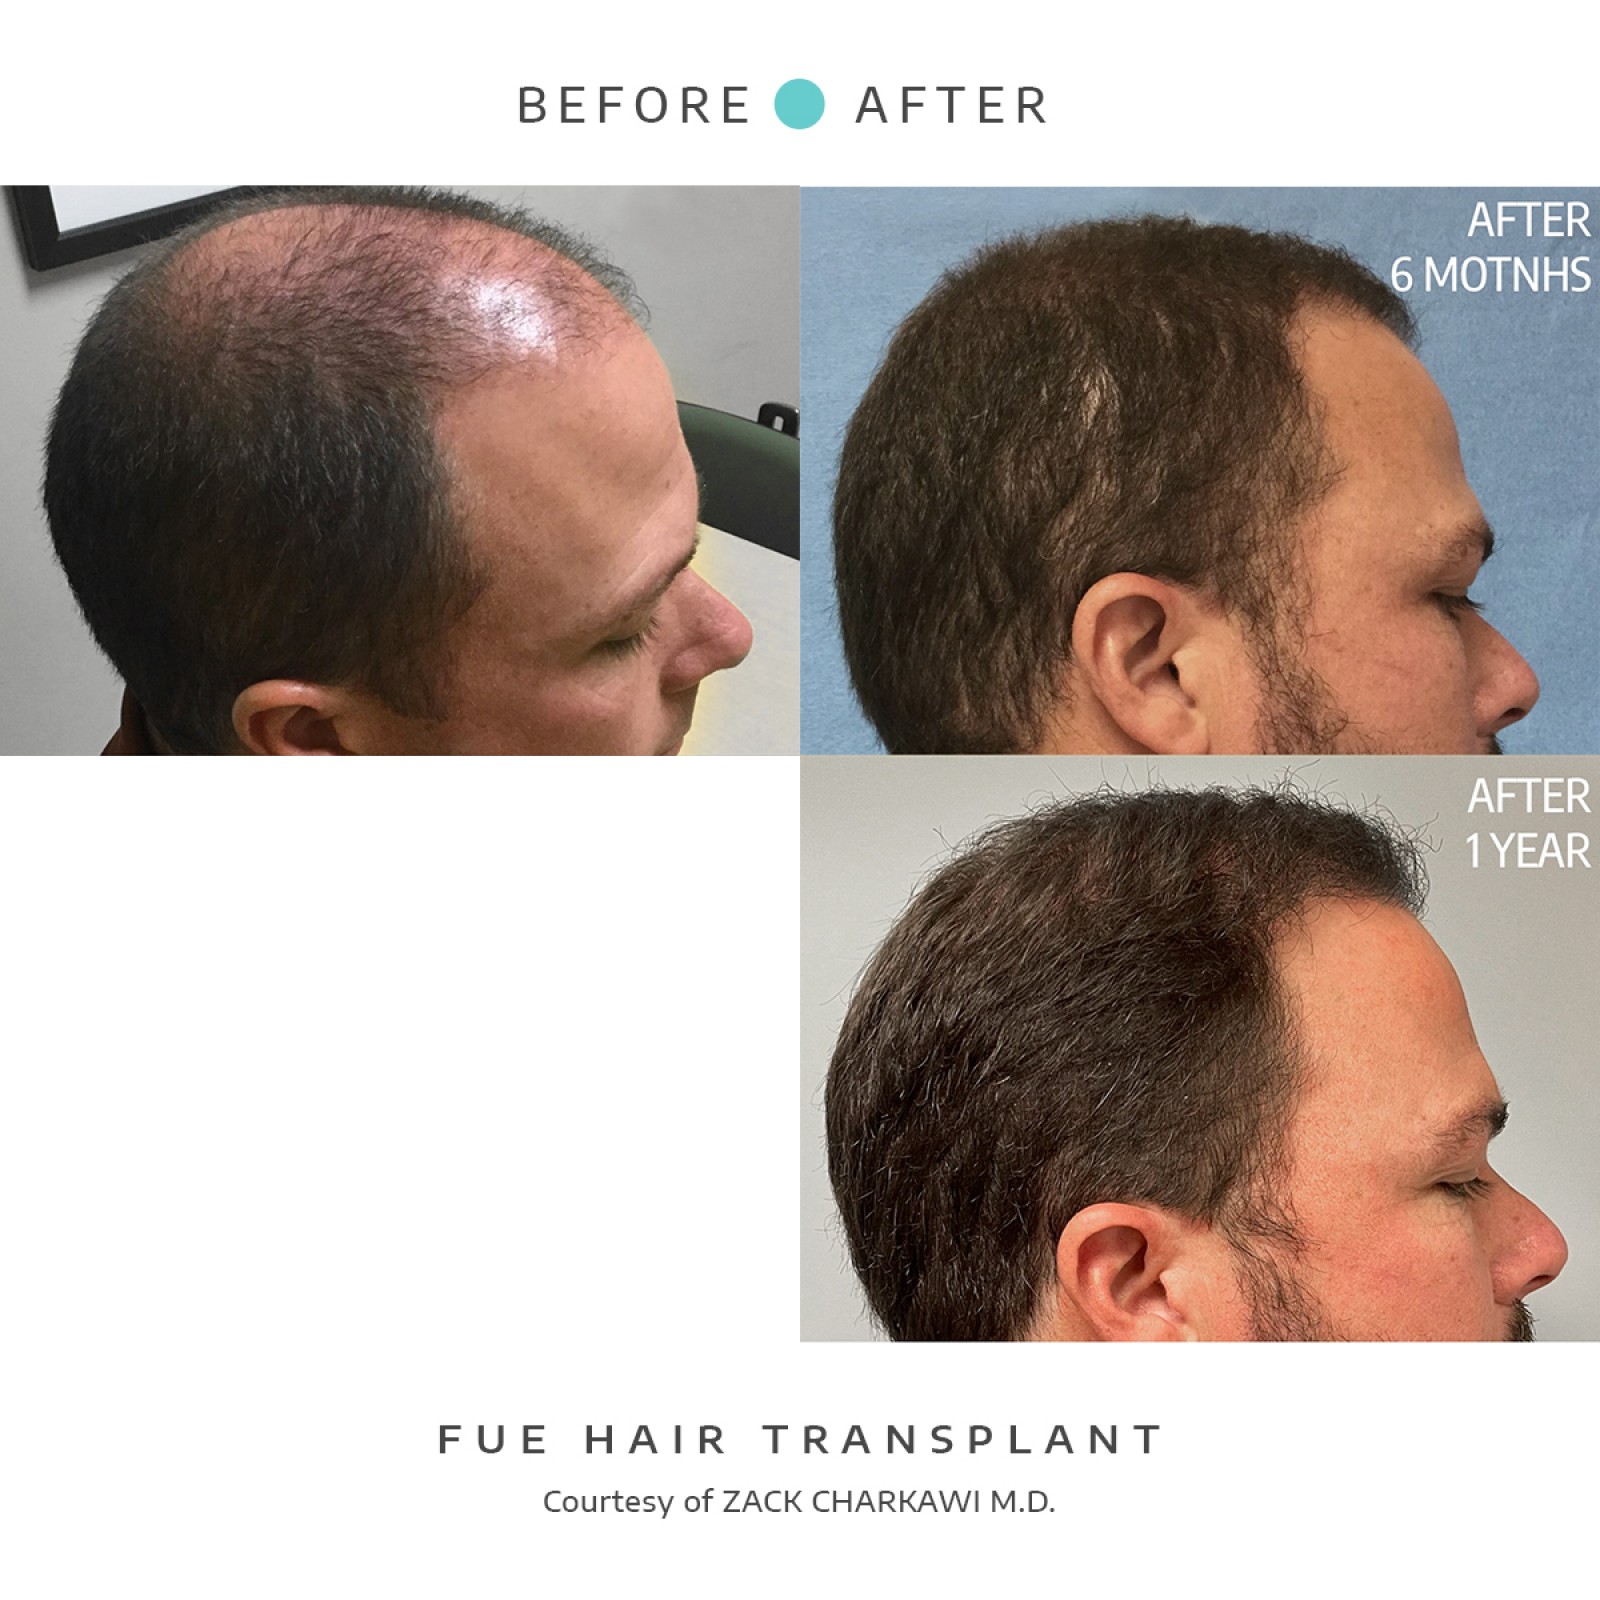 The before image shows a close-up of the scalp of a man suffering from hair loss, while the after image depicts a successful FUE hair transplant with thick and natural-looking hair.